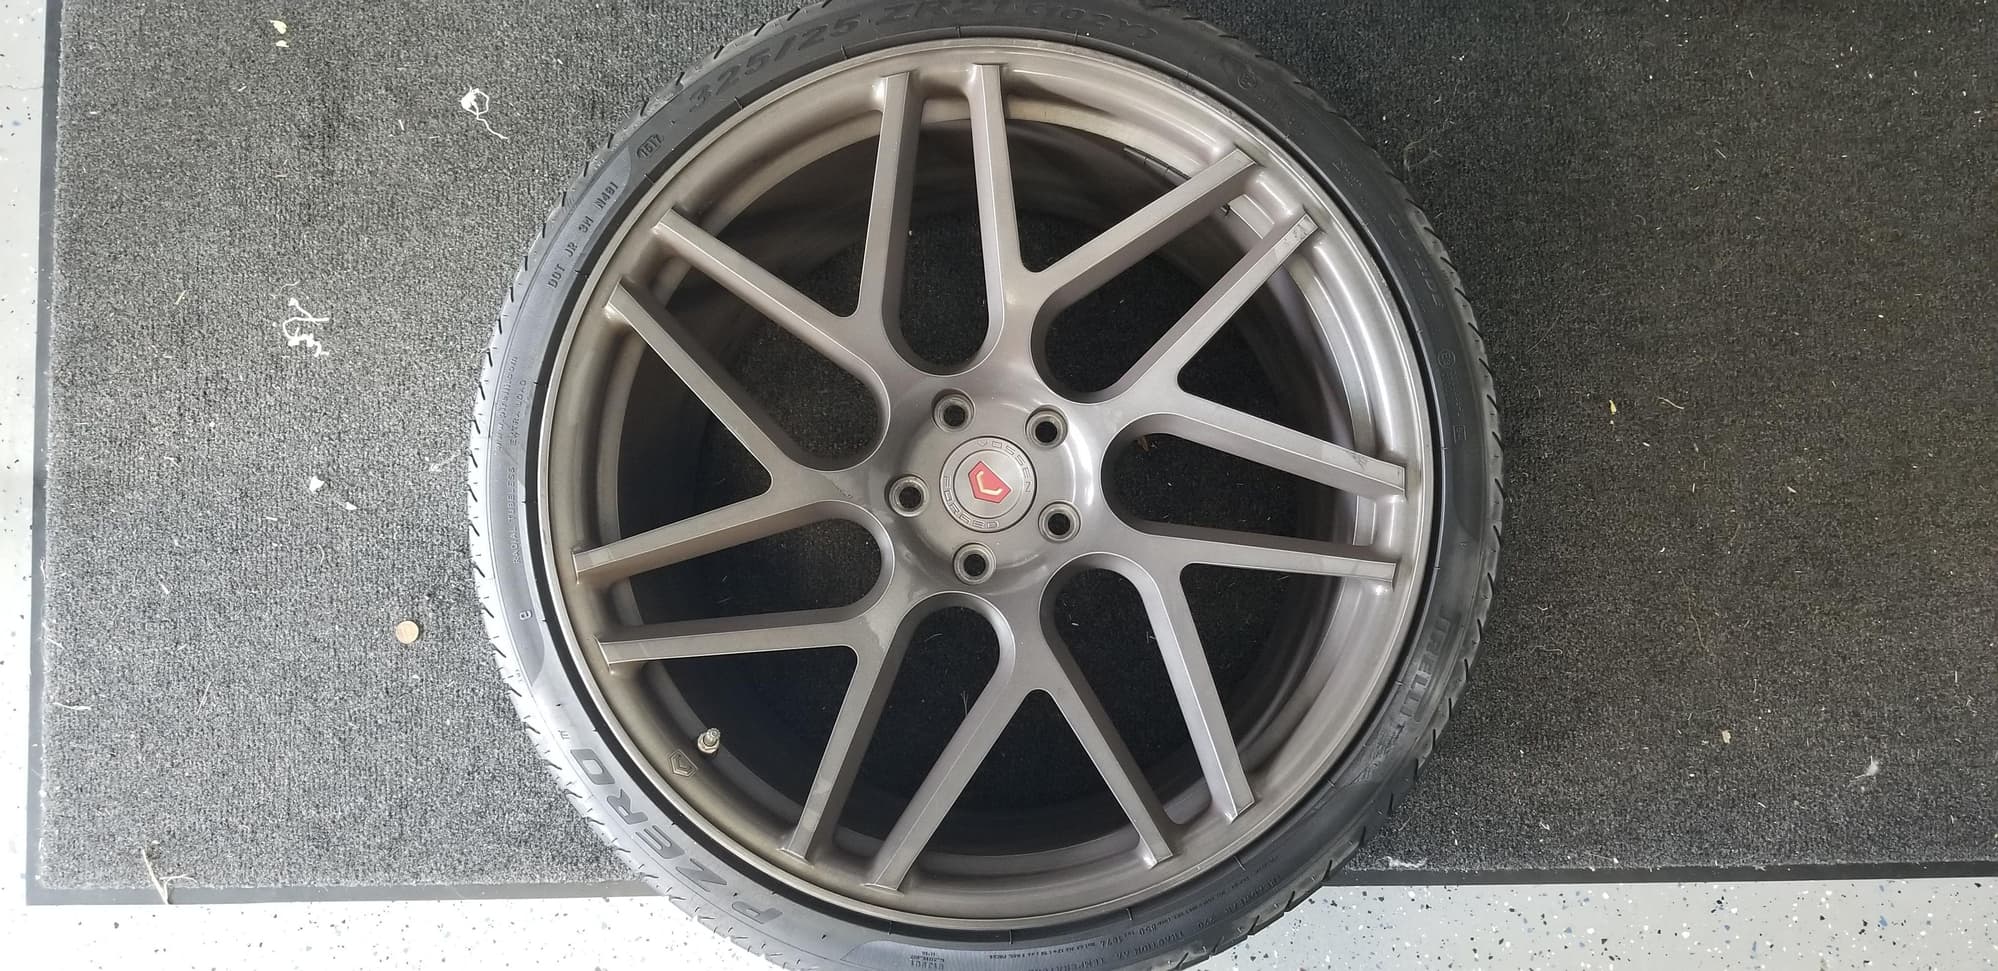 Wheels and Tires/Axles - Forged Vossen VPS-315T wheel set for Mercedes GT-S - Used - All Years Mercedes-Benz AMG GT S - Pembroke Pines, FL 33028, United States